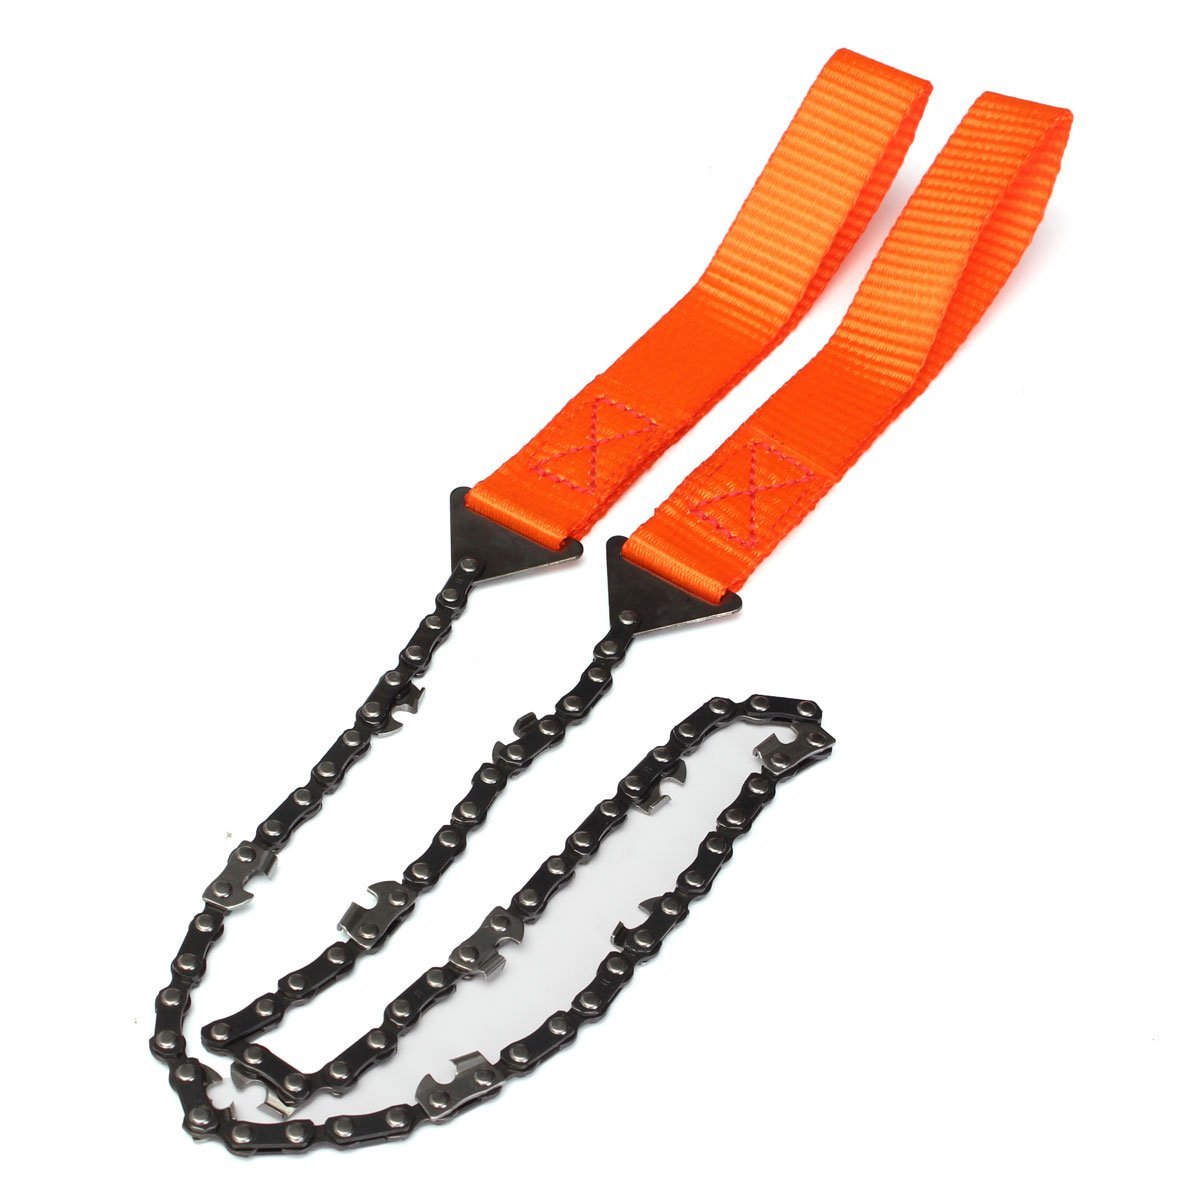 65 Manganese Steel + Nylon Thick Handle Multifunction Hand Chain Saw Camping-Haofang Outdoor Store-Bargain Bait Box